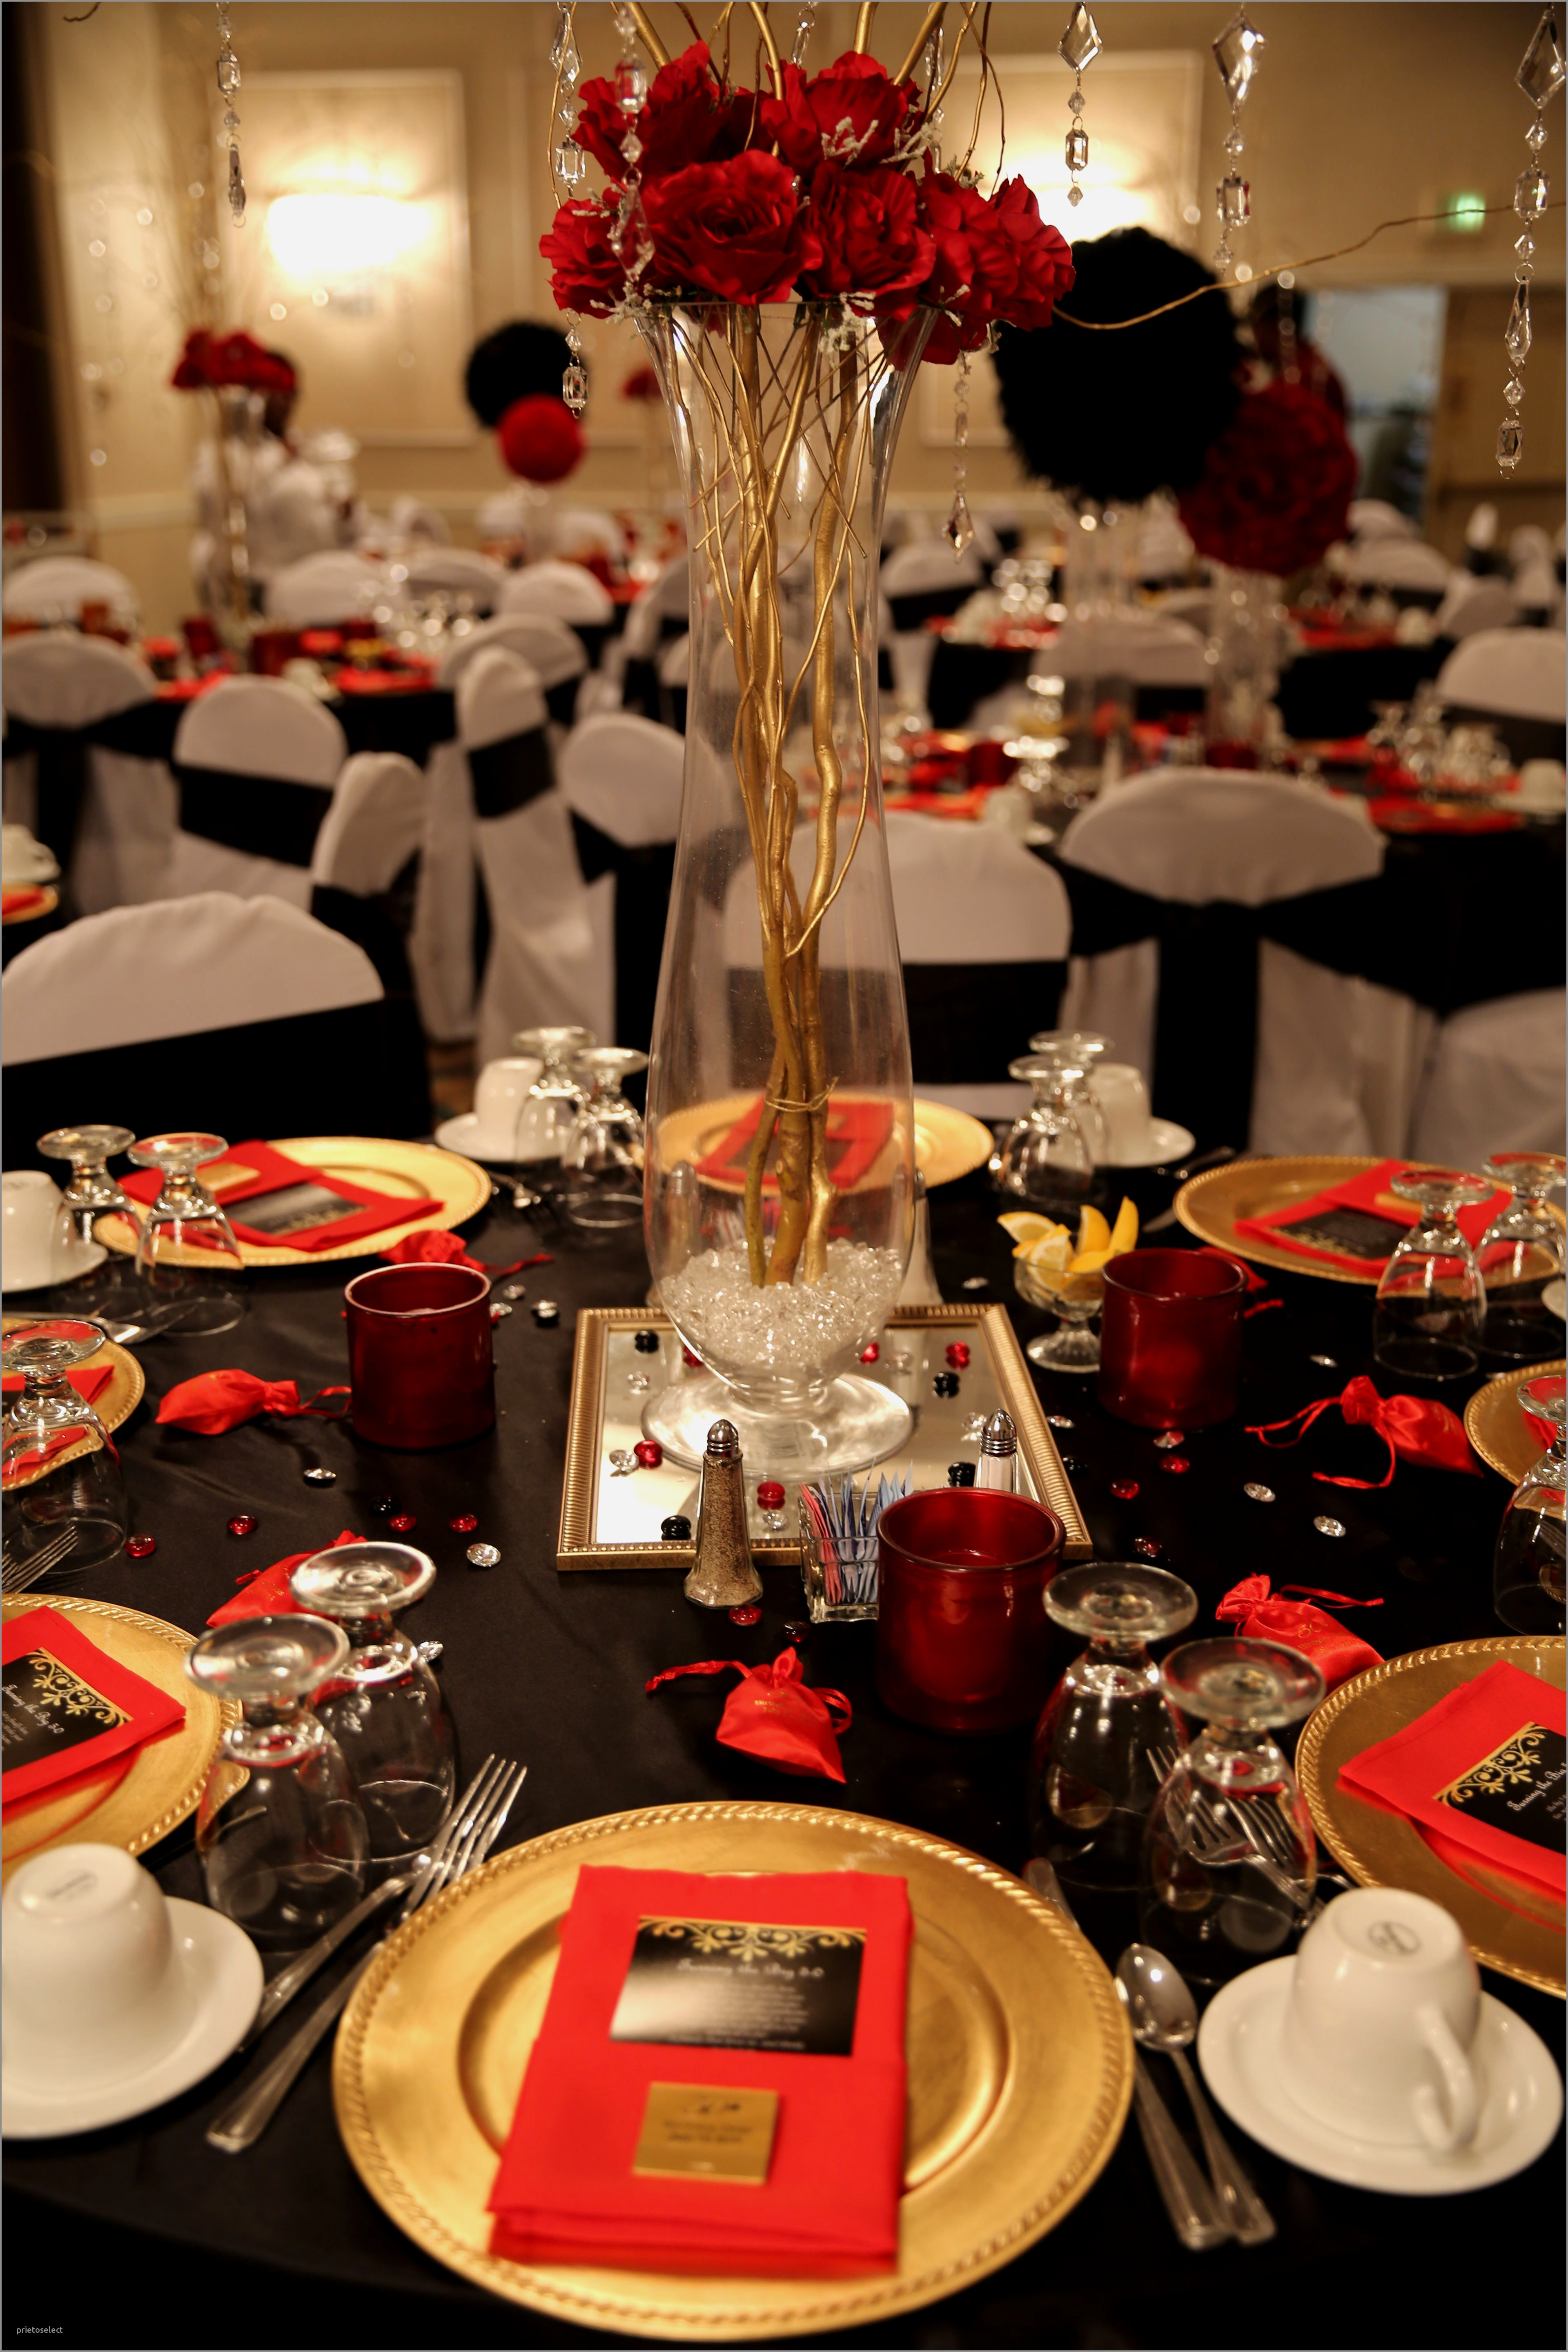 vase filler ideas wedding of 75th birthday table decorations awesome a¢ea 15 cheap and easy diy in 75th birthday table decorations best of red black and gold table decorations for 50th birthday party